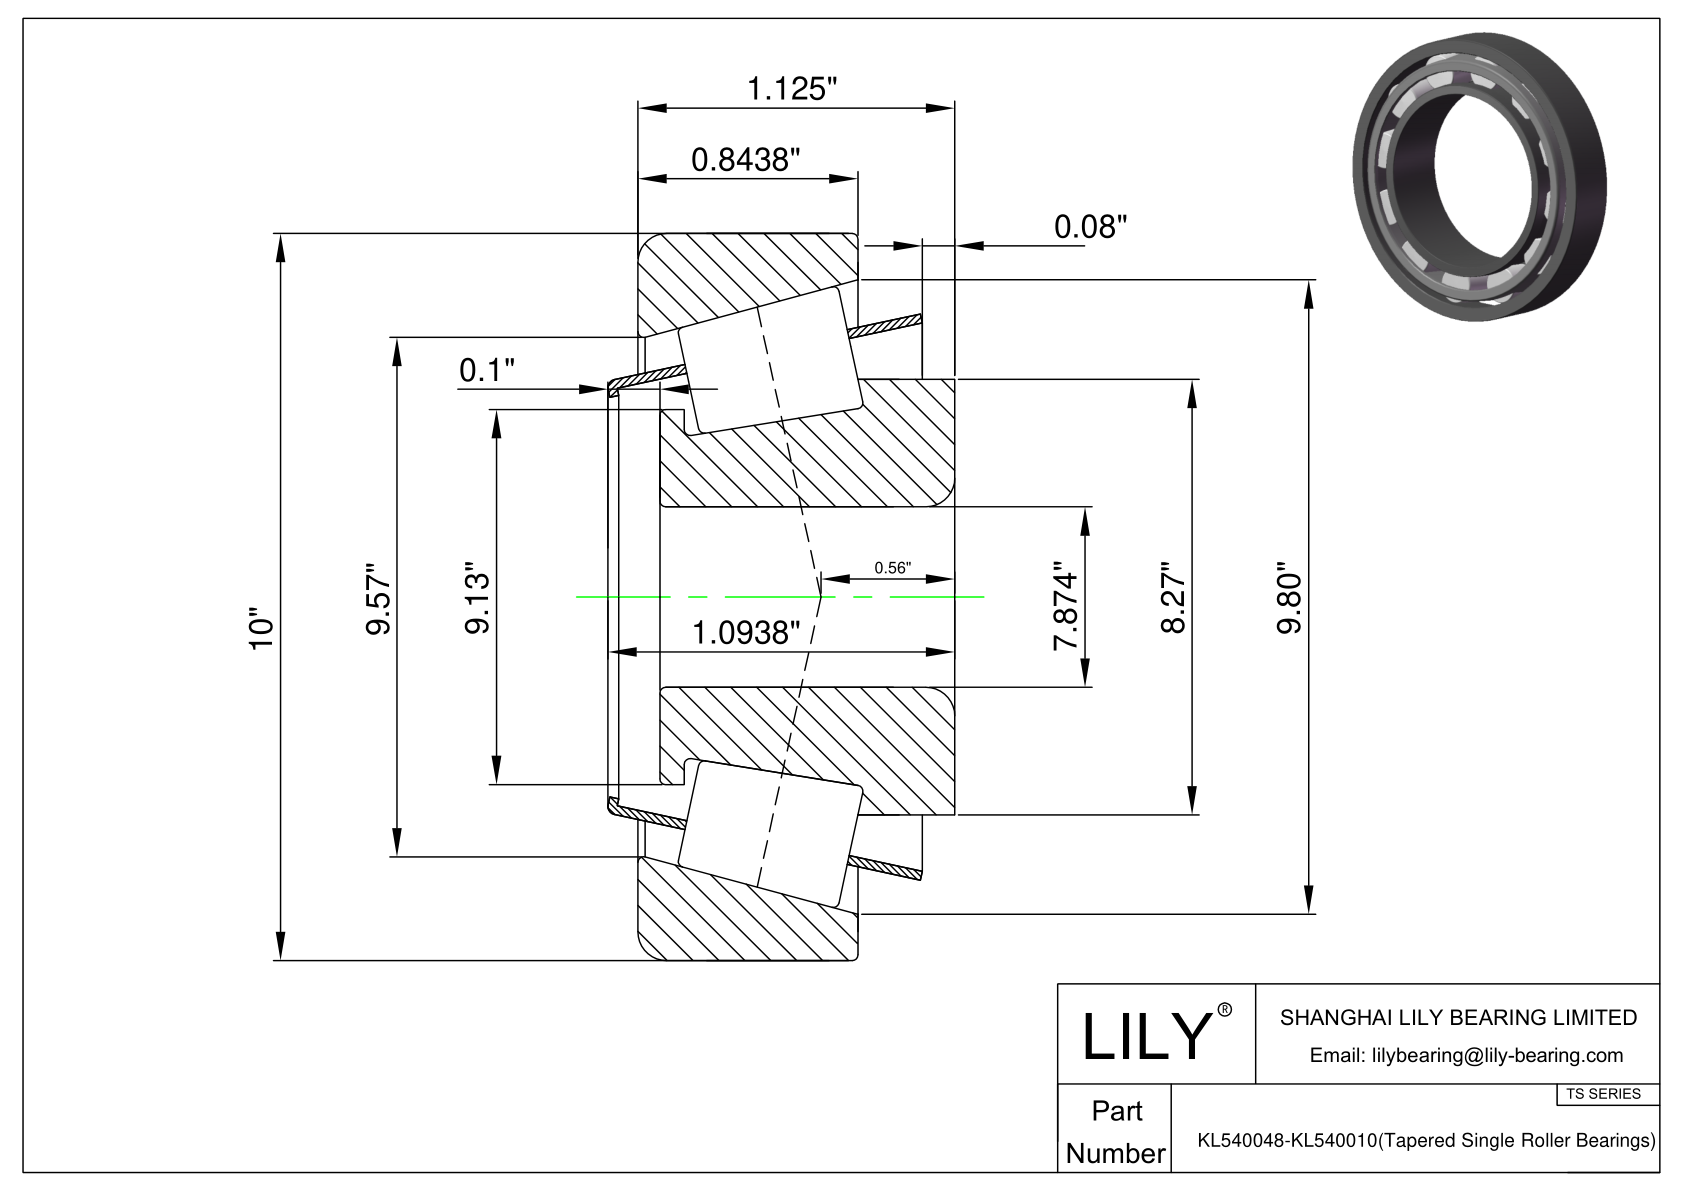 KL540048-KL540010 TS (Tapered Single Roller Bearings) (Imperial) cad drawing